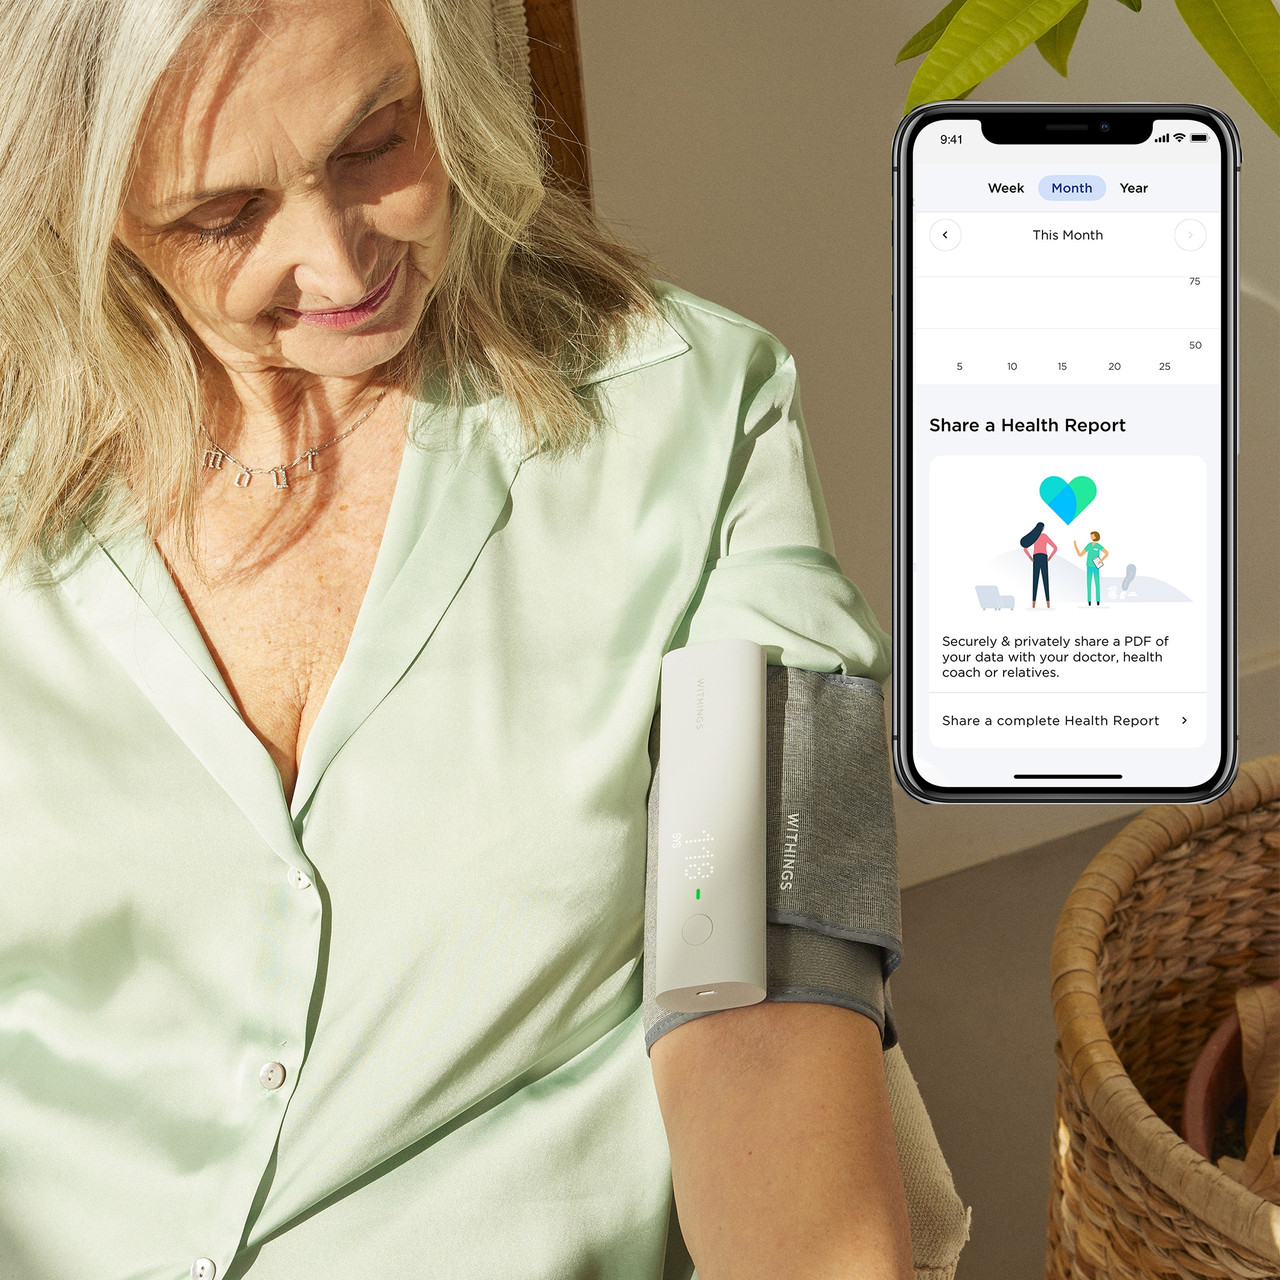 Withings Bpm Connect - Wifi Blood Pressure Monitor : Target